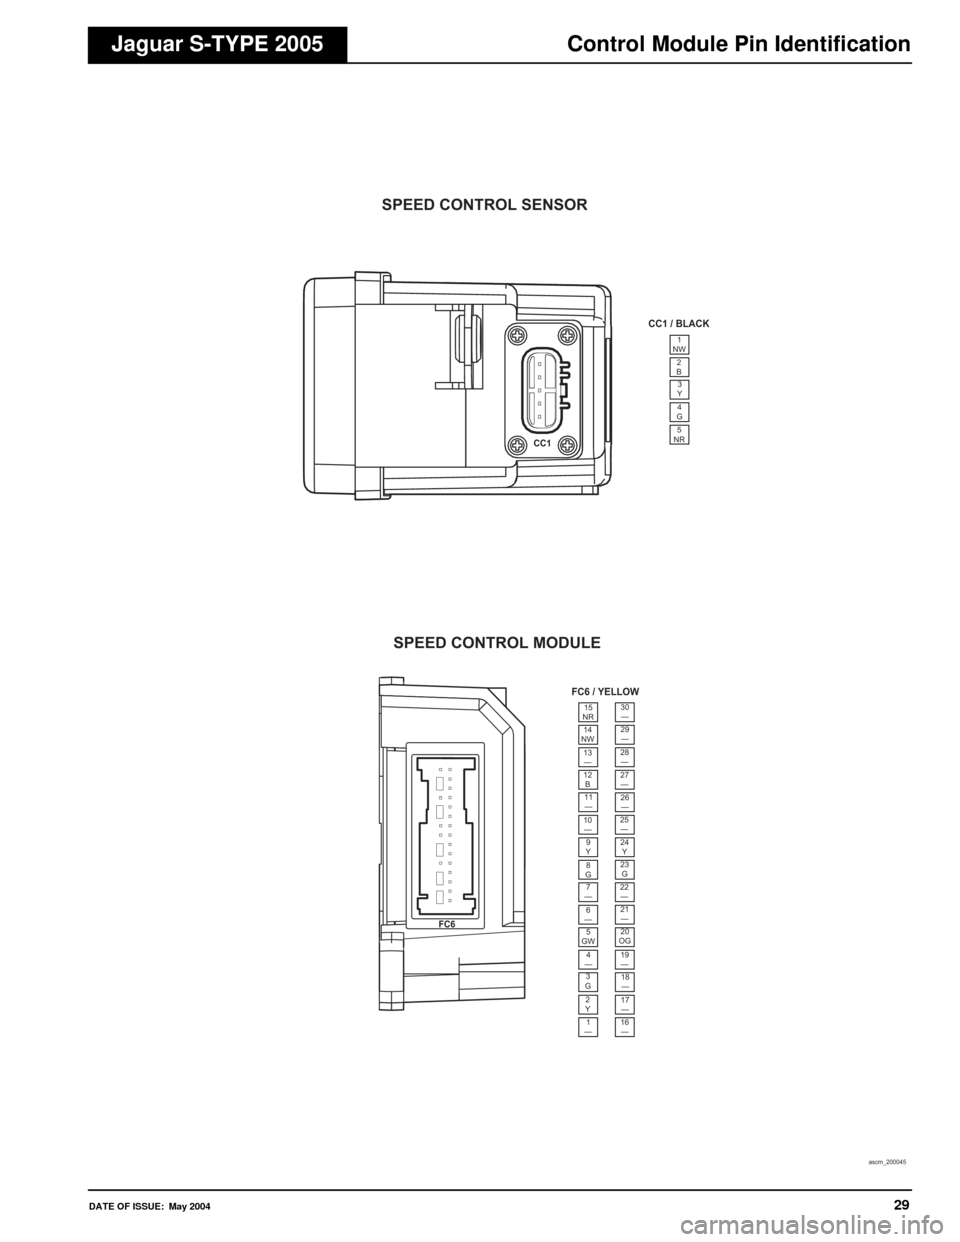 JAGUAR S TYPE 2005 1.G Electrical Manual 
DATE OF ISSUE: May 200429
Control Module Pin IdentificationJaguar S-TYPE 2005
1NW2B3
Y
4
G5
NR
1
—
2
Y 3
G 4
—
5
GW 6—
7—
8
G 9
Y
10
—
11—
12
B
13—
14NW
15NR
17—
18—
19—
20
OG 21�